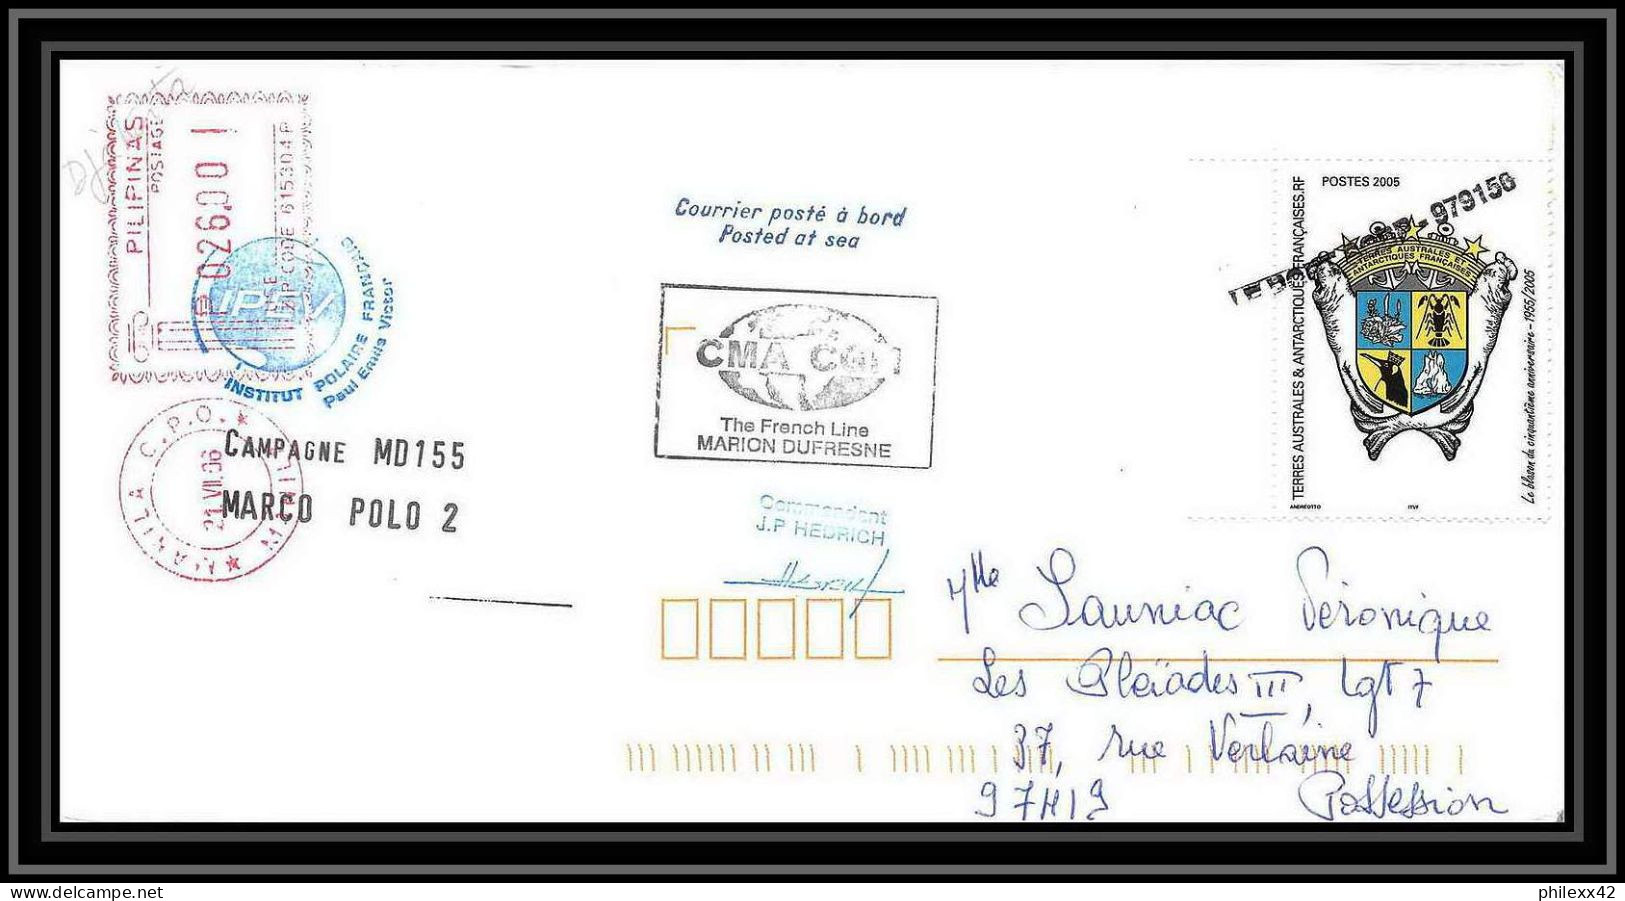 2592 ANTARCTIC Taaf Philippines Pilipinas Mixte Lettre Cover Dufresne 2 Signé Signed Md 155 Marco Polo 2 2006  - Philippinen